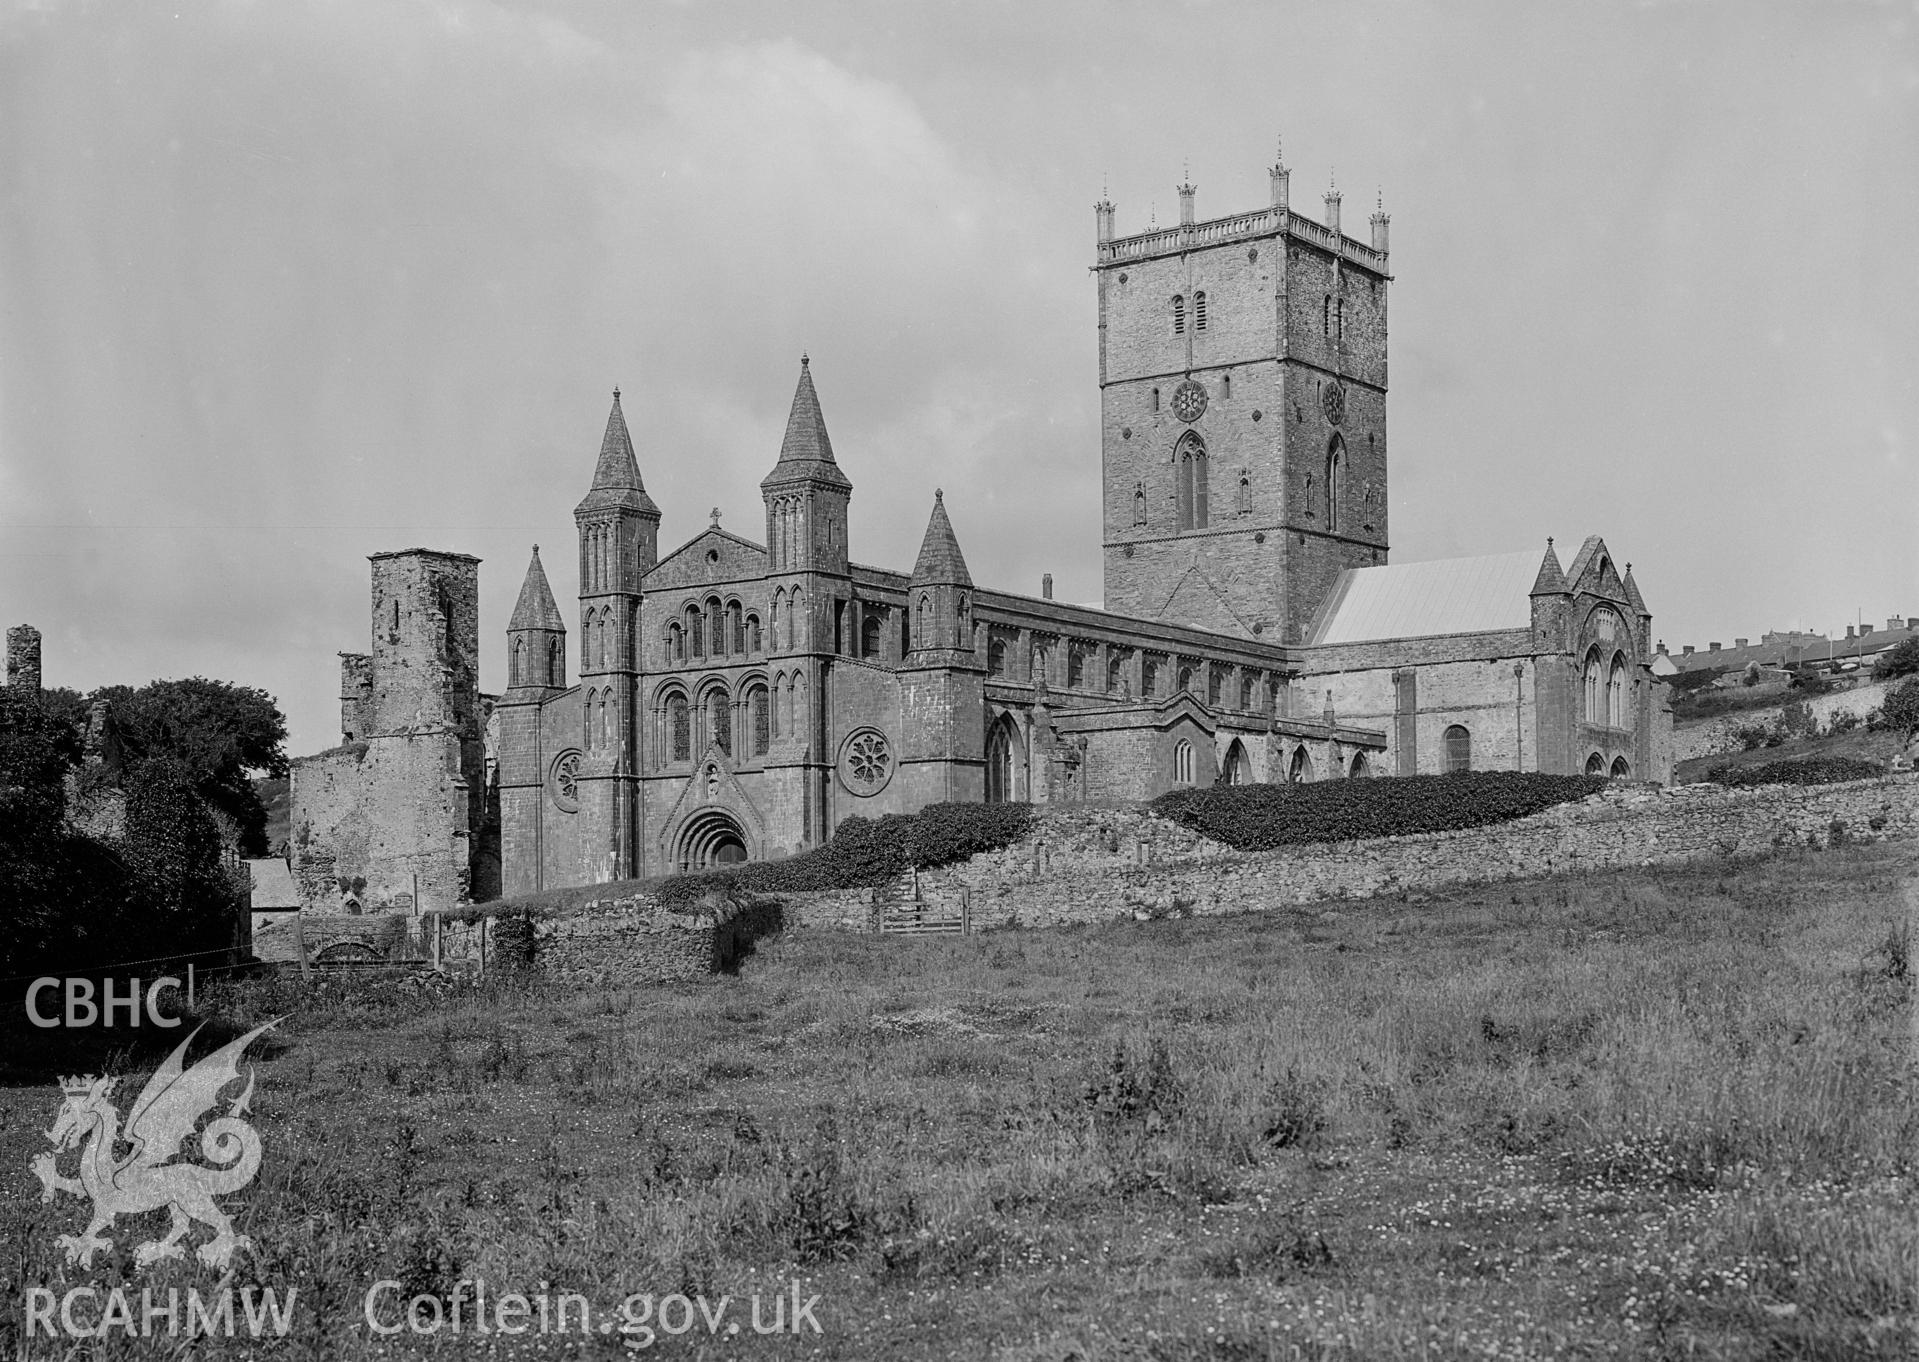 View of St Davids Cathedral from the southwest.